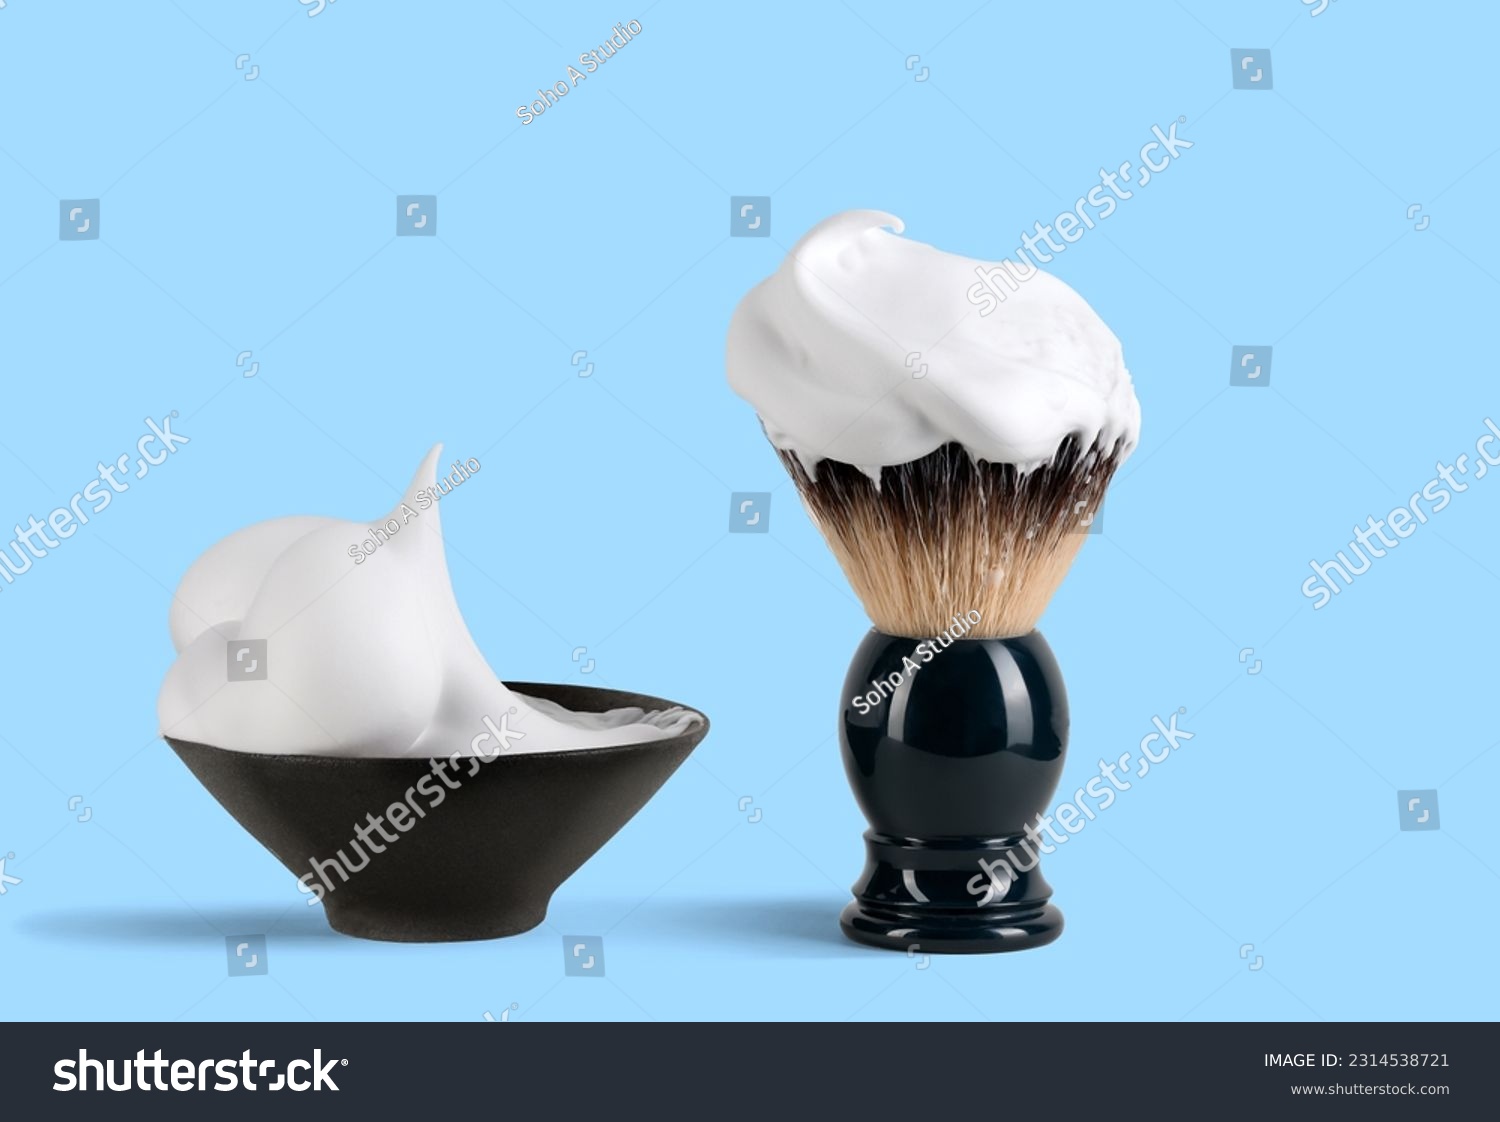 Shaving brush with raccoon fur and shaving foam in ceramic bowl on blue background. #2314538721